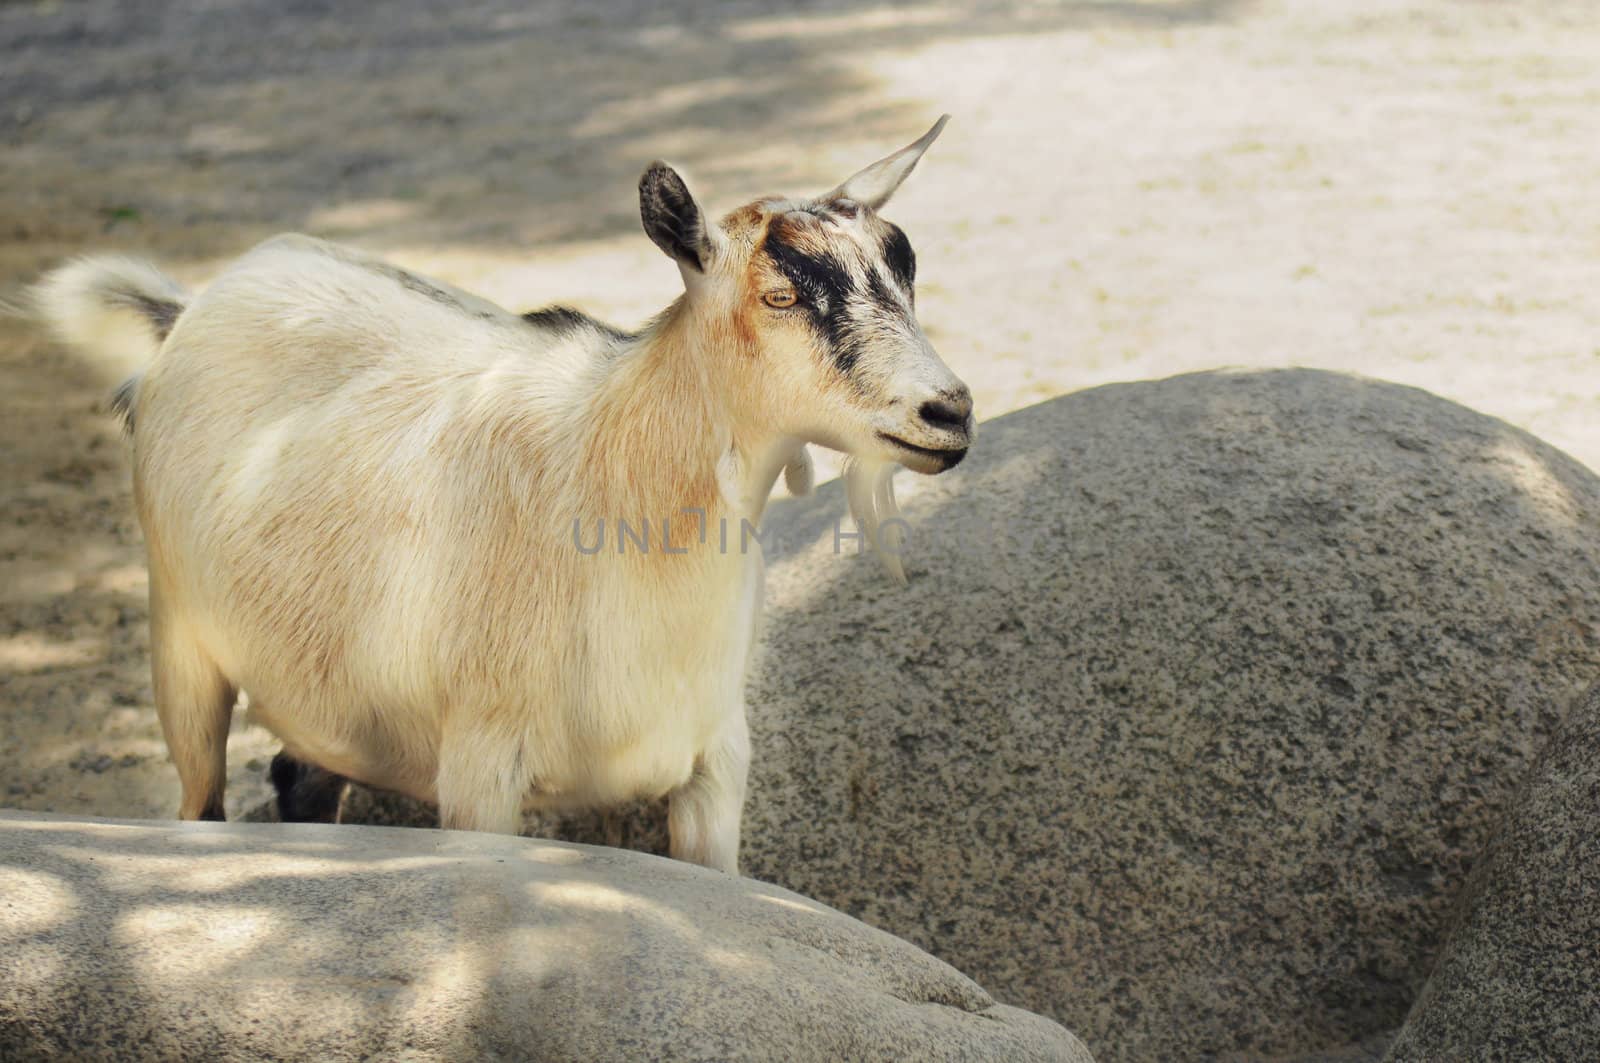 Cute creme color goat looking at camera, standing in the shade between rocks.